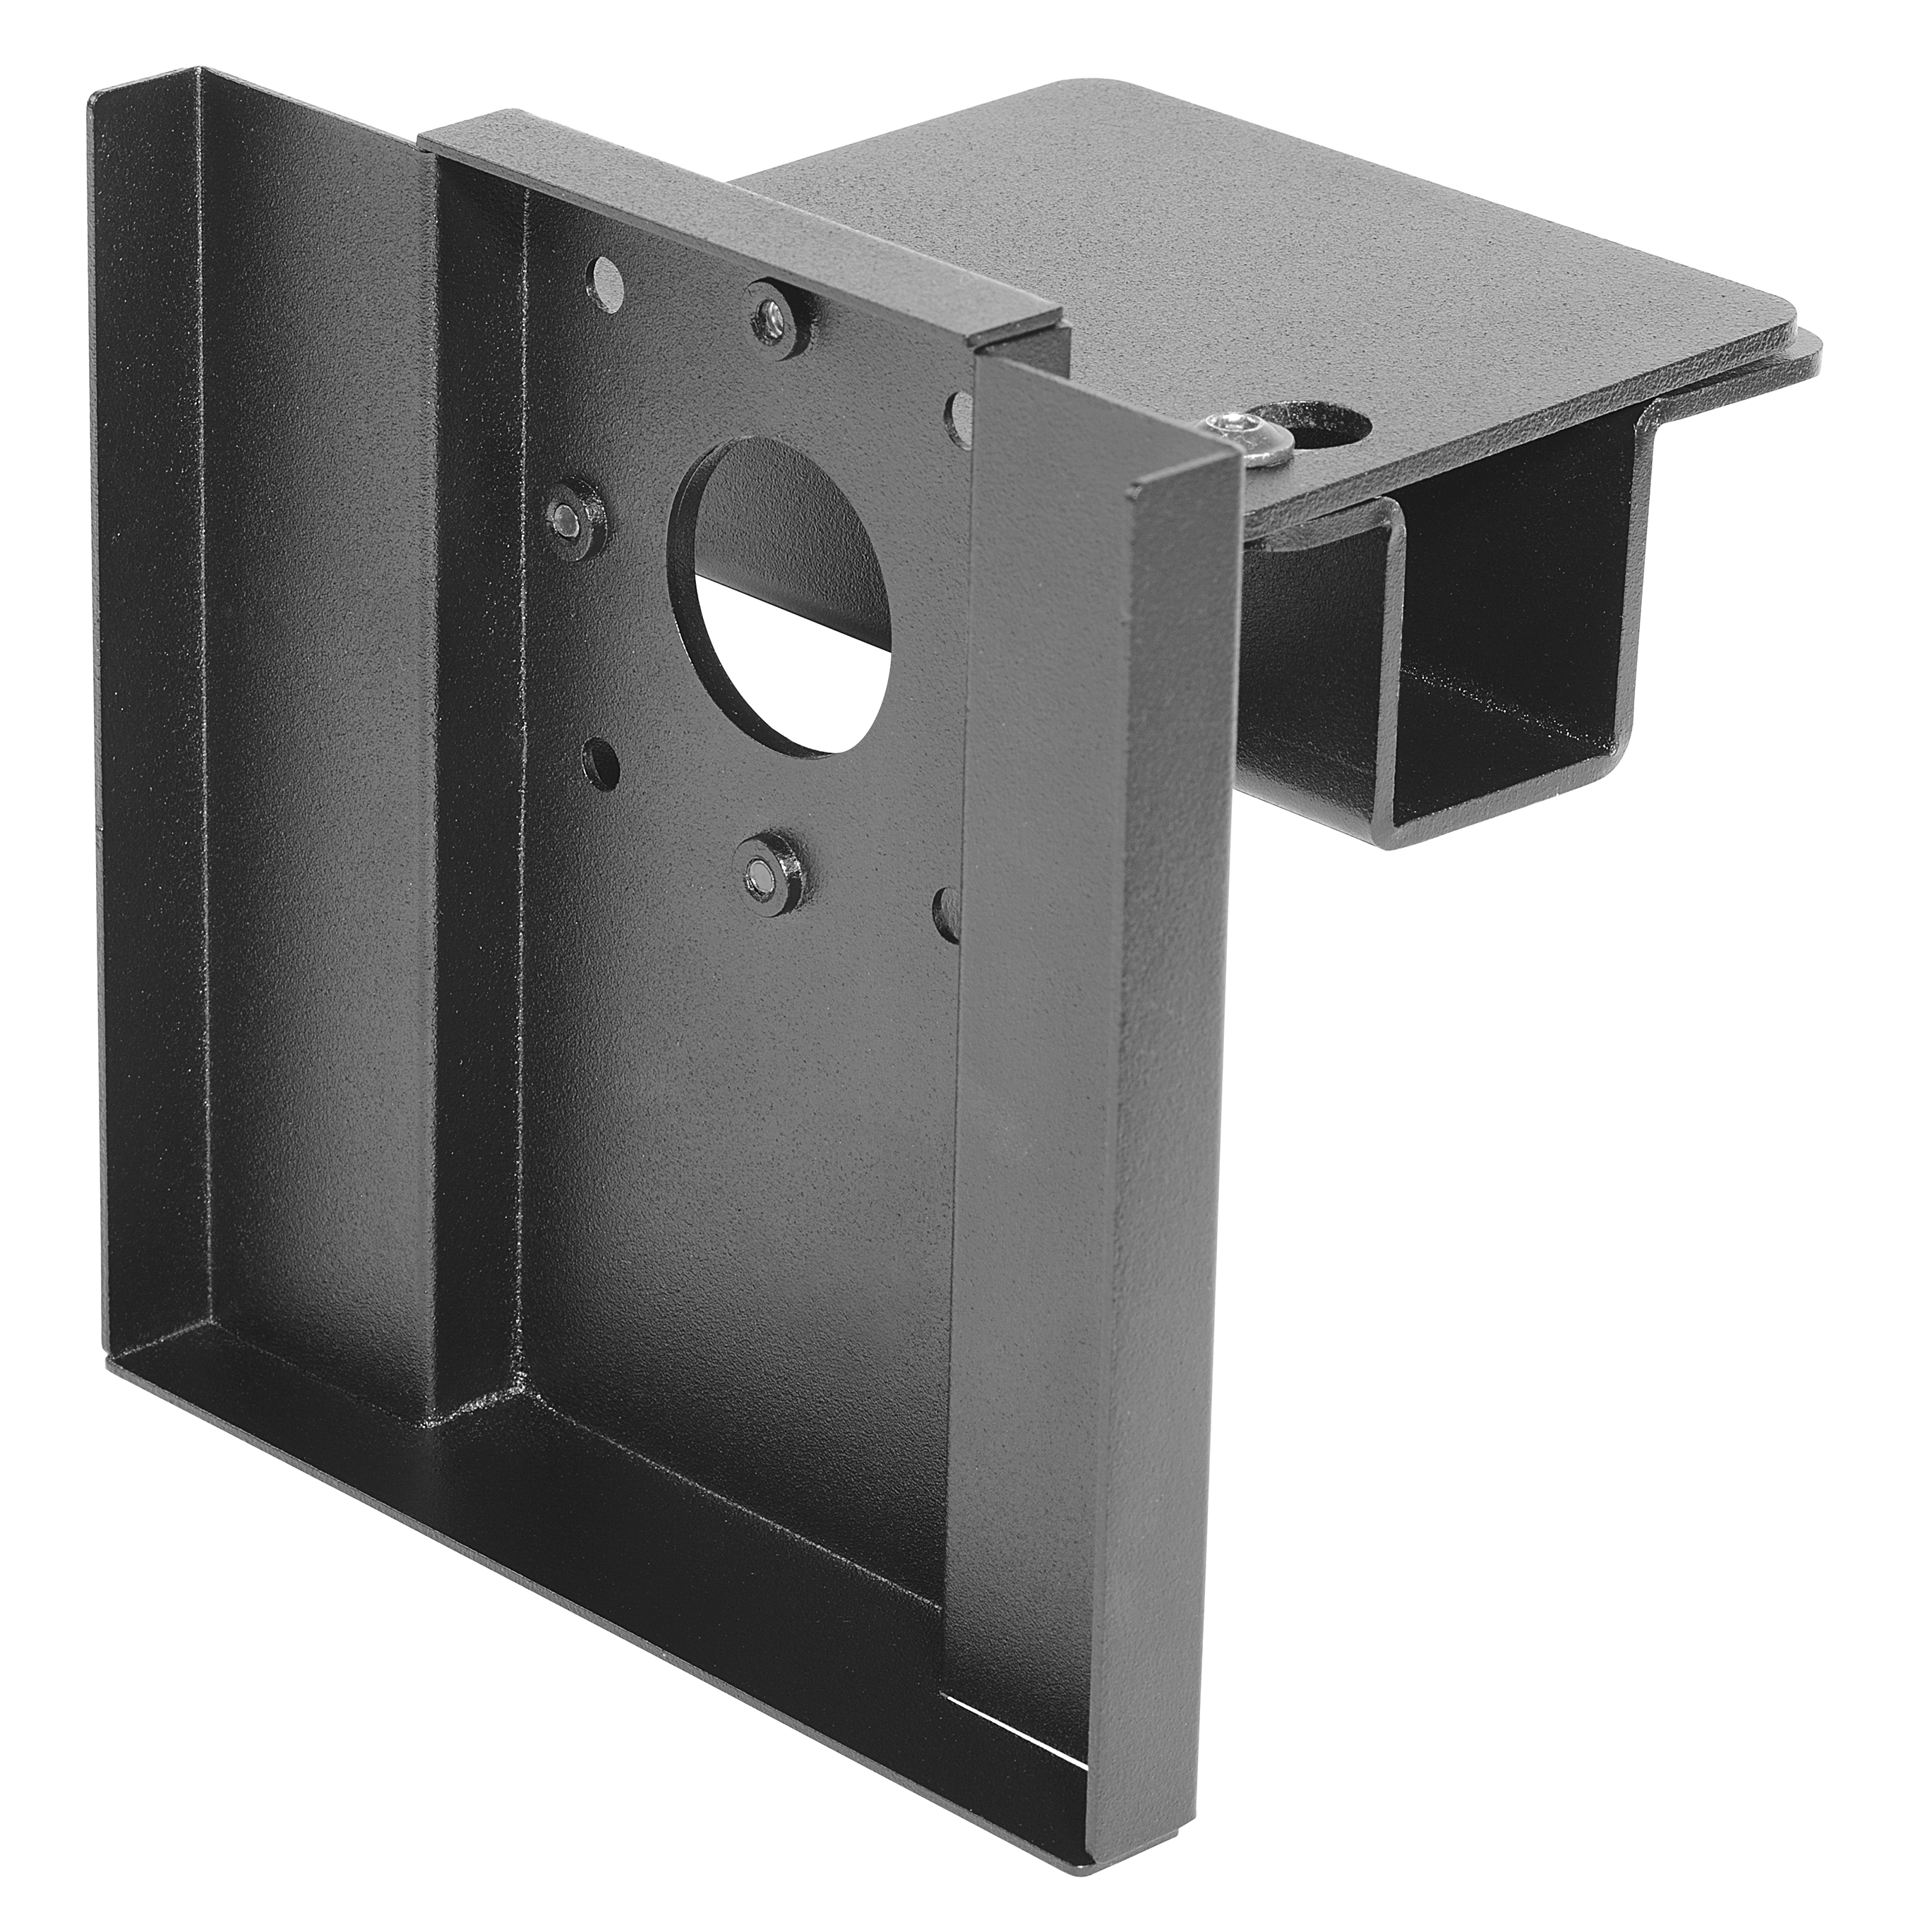 DSF210-SFC Flat Shelf Mount for Samsung DB10D Display with Rear Full Cover